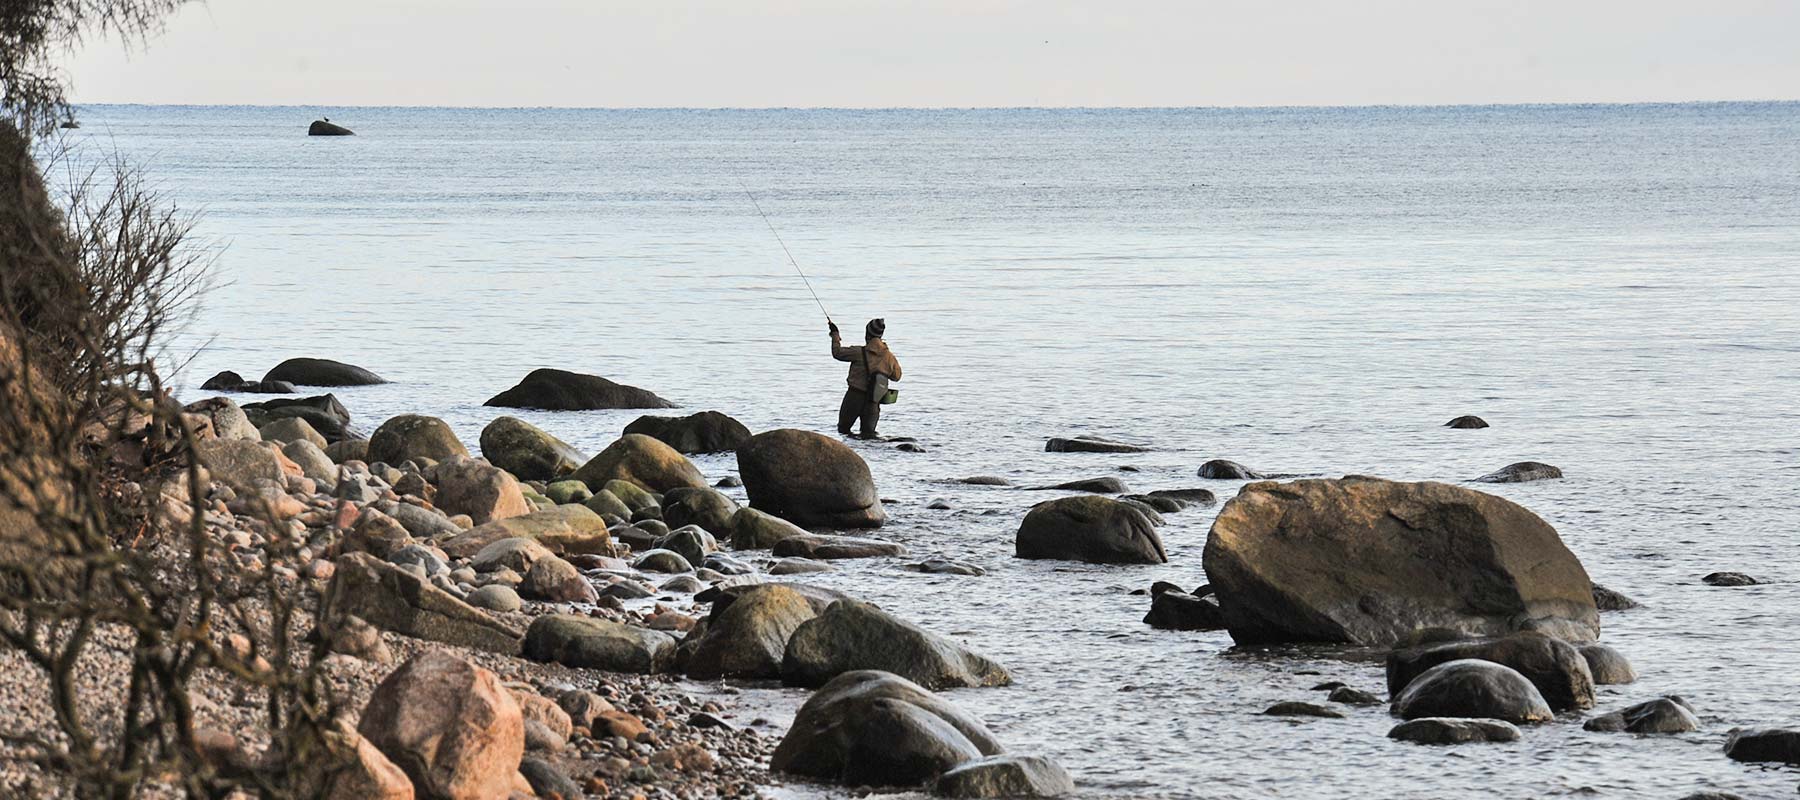 A Guide to Bombarda Fishing on Bornholm